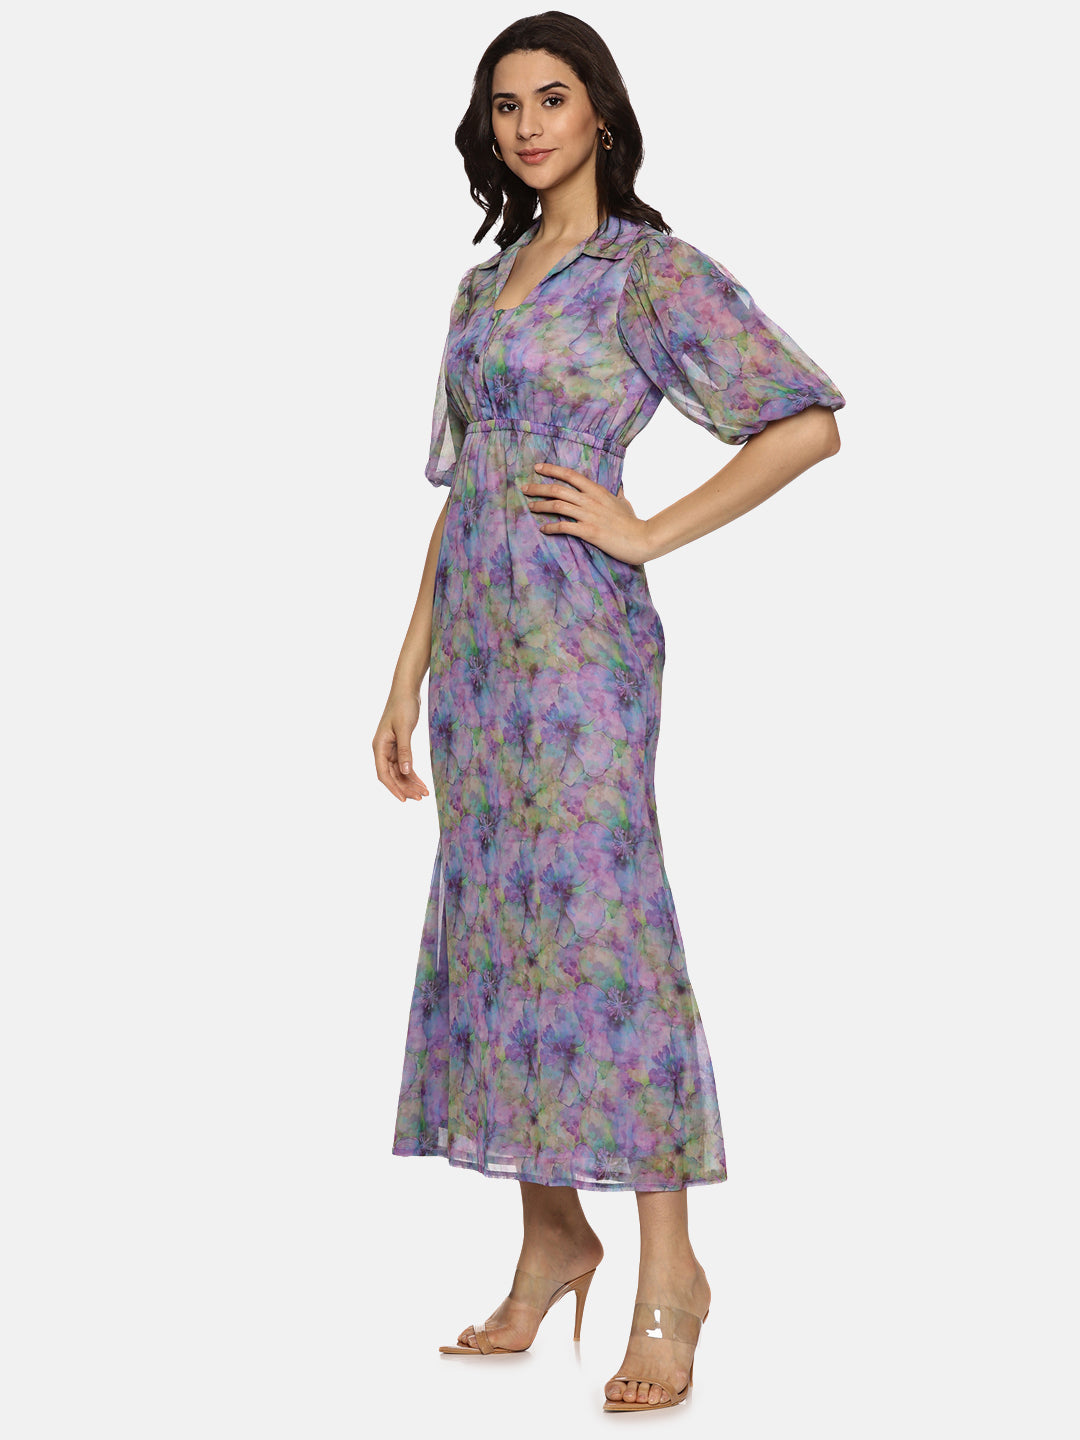 Buy Lavender Printed Floral Chiffon Fabric | Shirt Collared Maxi Dress Online In India